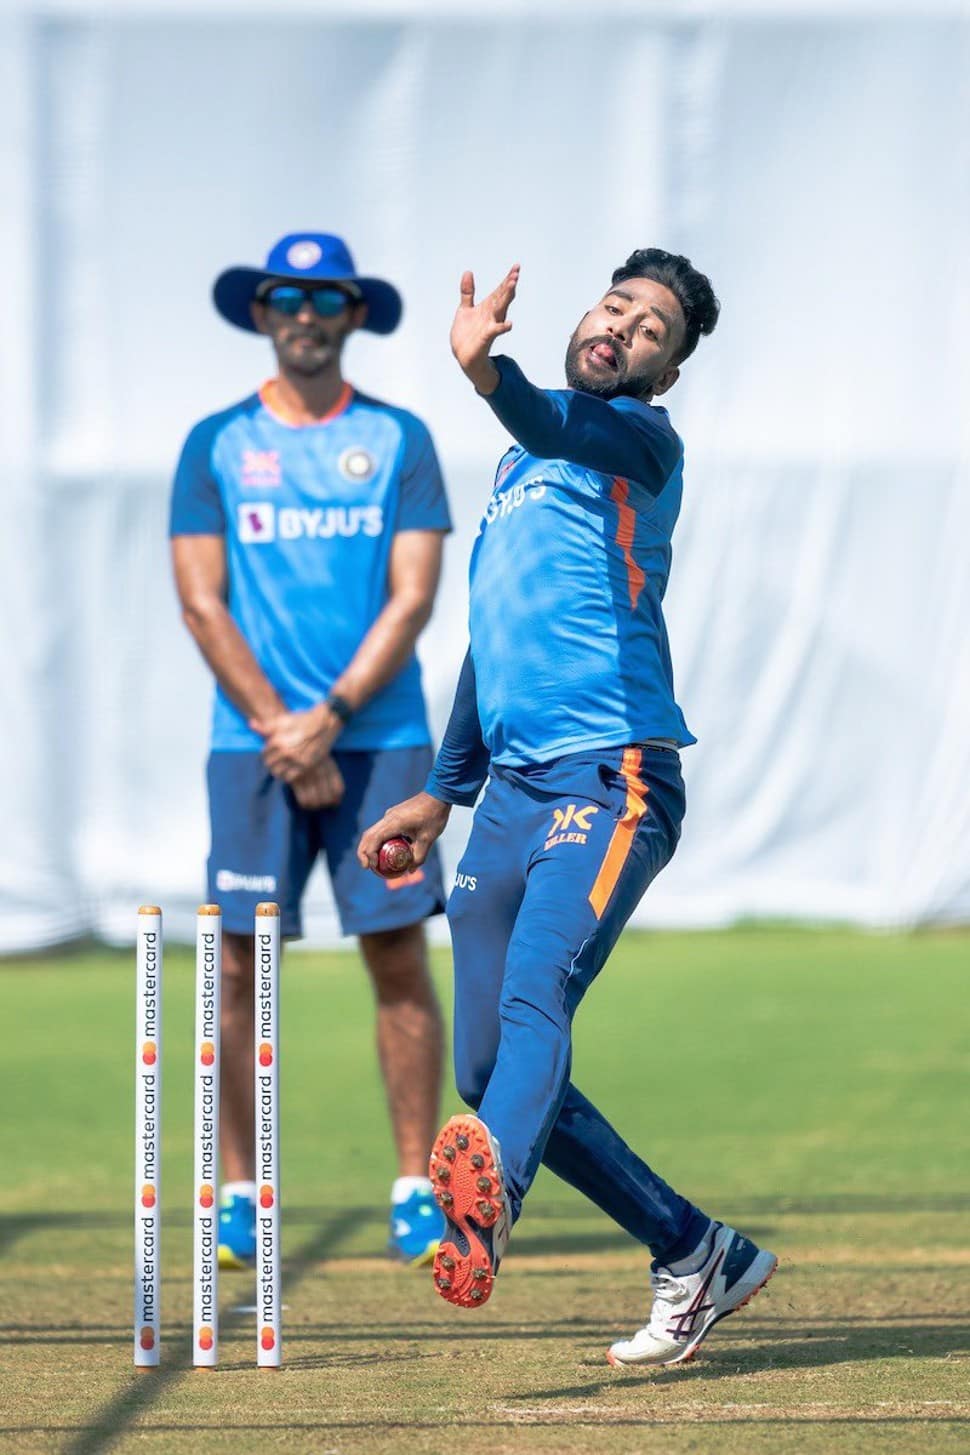 In January 2023, Mohammed Siraj took 4 wickets in the first ODI in IND vs NZ ODI series. Later in the month, Siraj became third Indian pacer to be ranked No. 1 bowler in ODI cricket. (Source: Twitter)